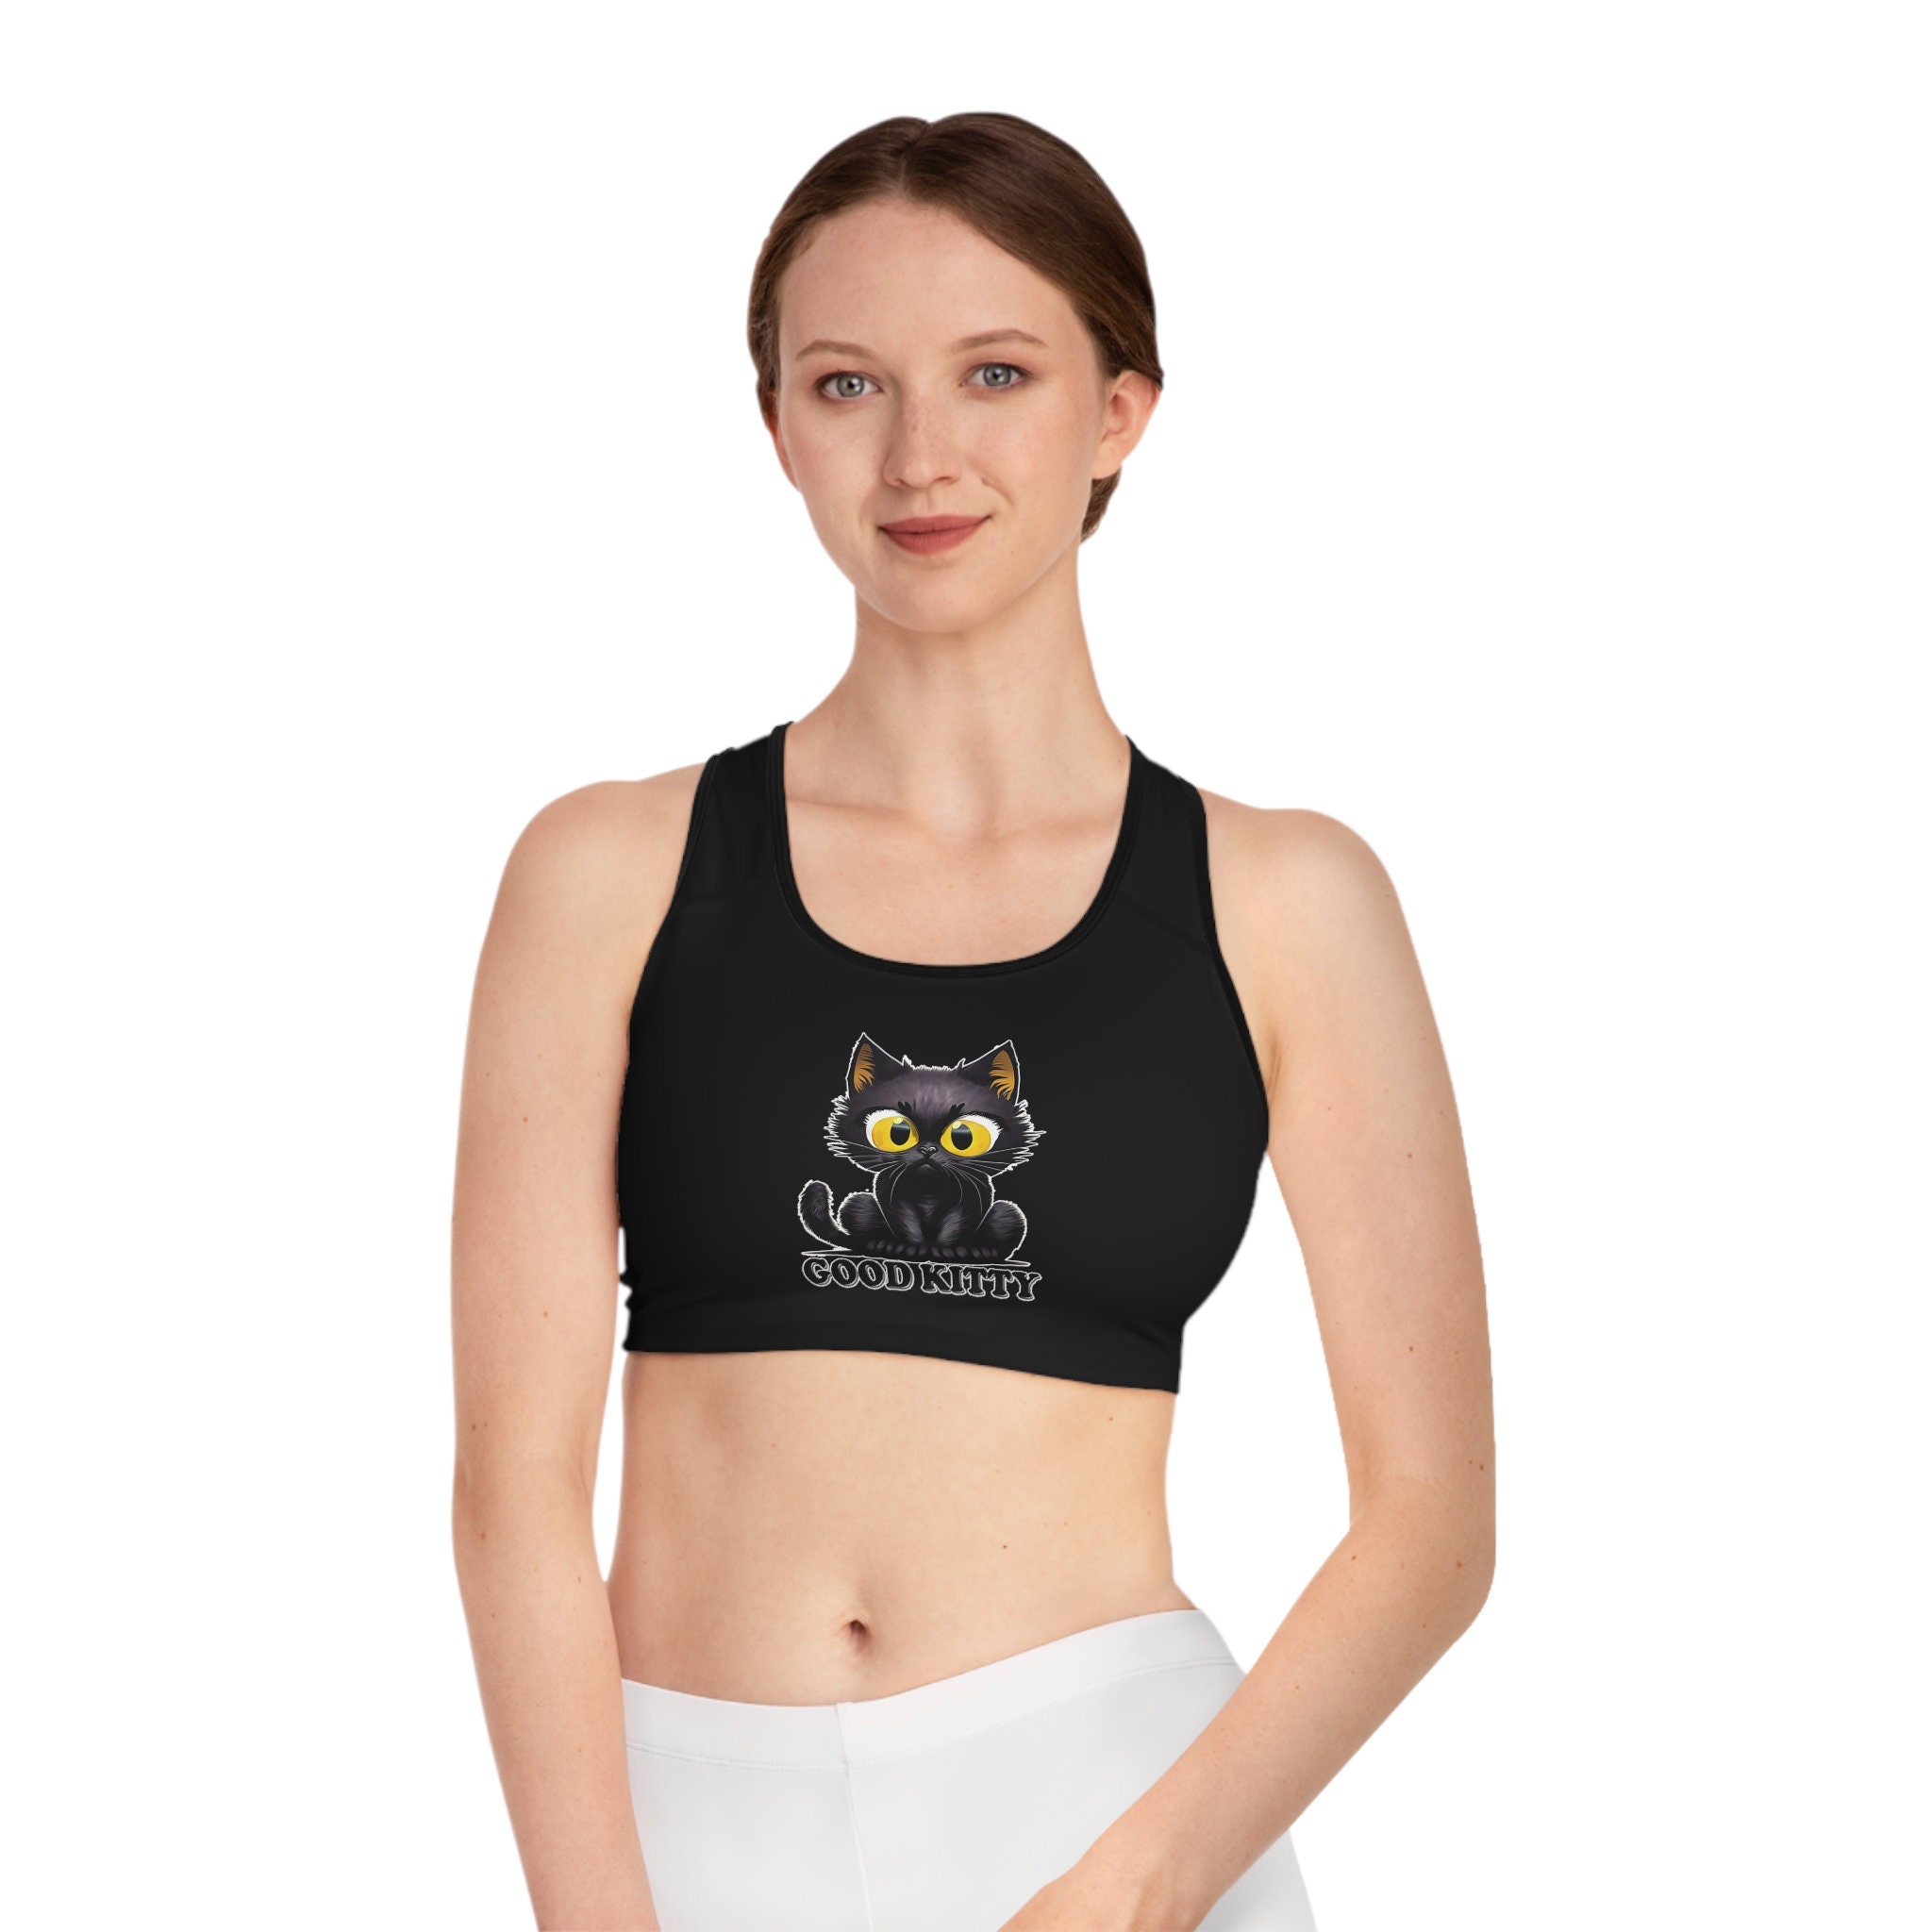 Padded Picture Purrrfect Sports Bra Kawaii Pastel Goth Cute Cute Style  Workout, Fitness, Exercise, Rare and Unique 